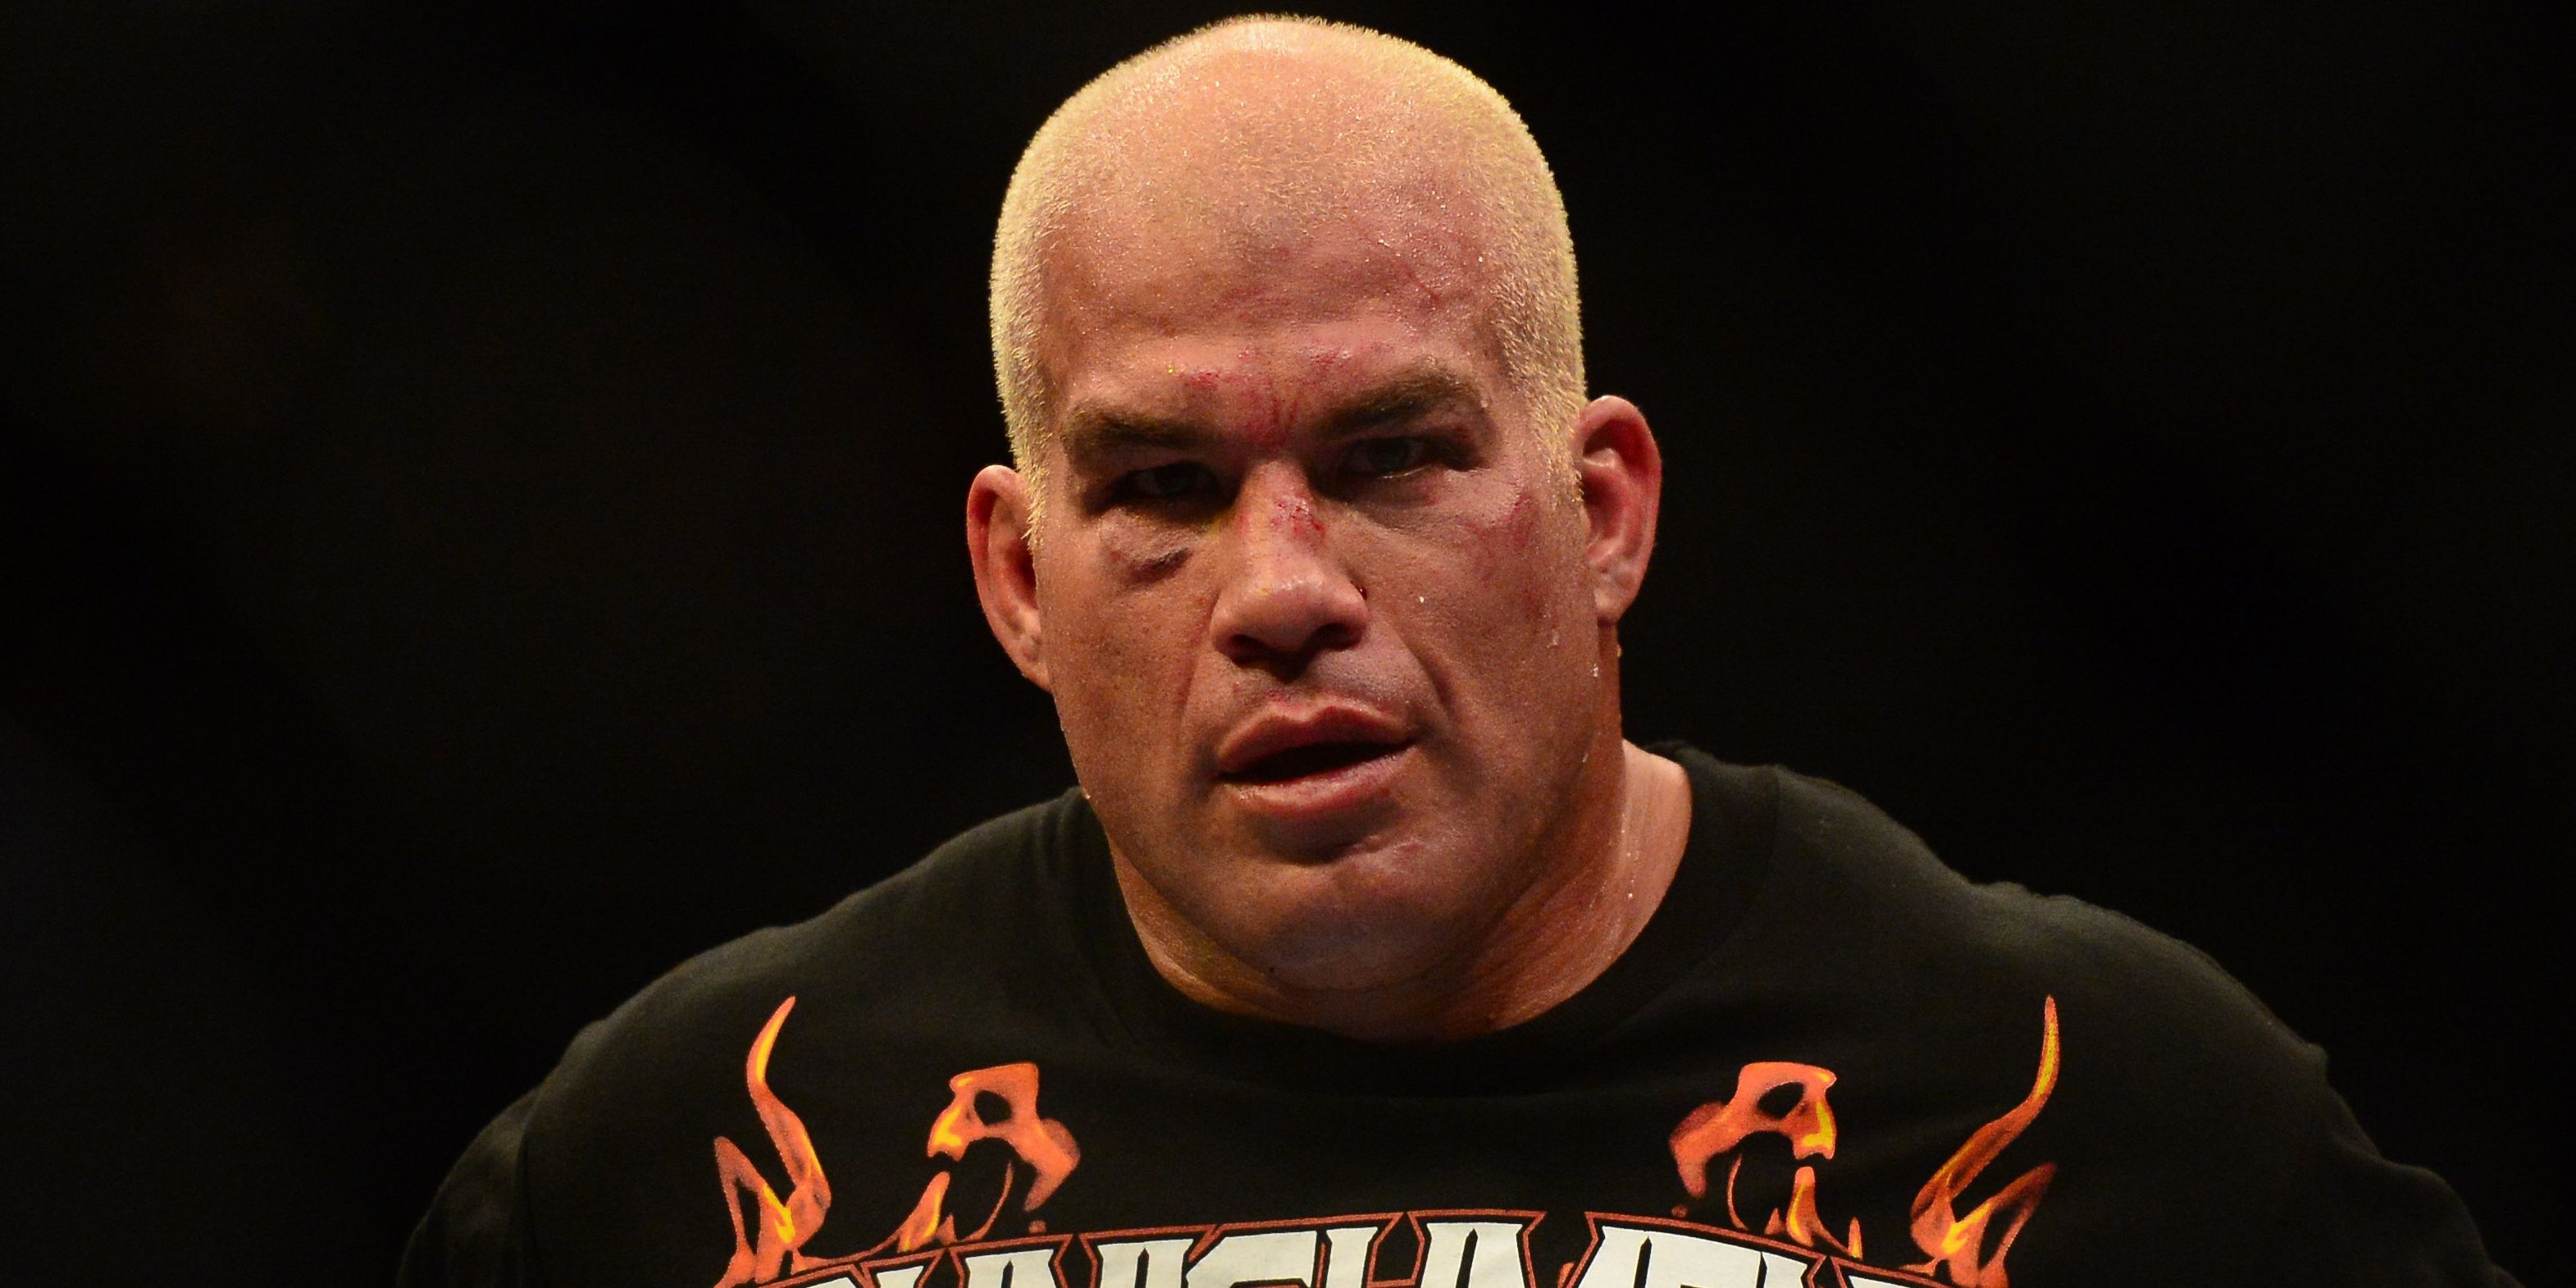 tito-ortiz-wearing-punishment-shirt-with-a-bruised-face